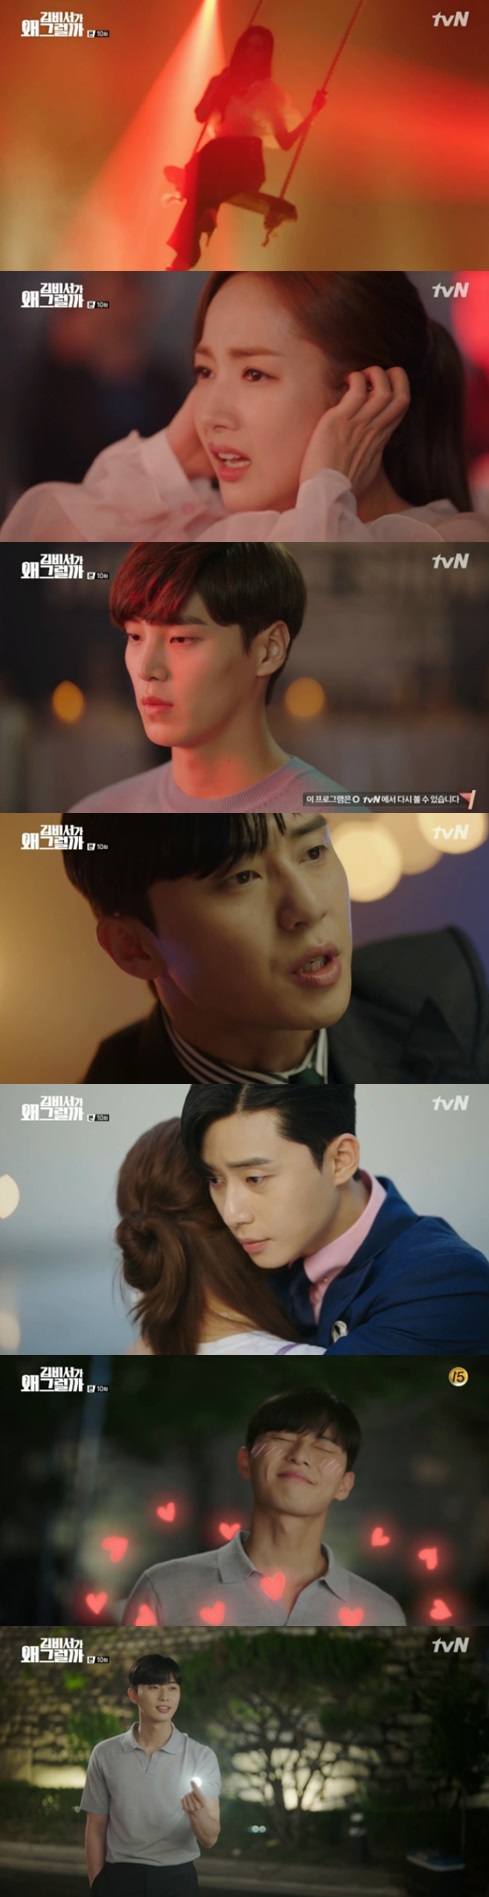 Why would Kim do that? Actor Park Seo-joon put everything down to be recognized by the Park Min-young family.In the 10th episode of the cable channel tvN drama Why is Secretary Kim doing that (played by Baek Sun-woo directed by Park Joon-hwa), which was broadcast on the 5th night, Lee Yeongjun (Park Seo-joon), who even turned her hearts back to her sisters, who strongly opposed love, was portrayed.Kim Mi-so was convinced that Lee Yeongjun was his brother when he was a child, but pretended not to know himself for Lee Yeongjun, who was deliberately avoiding.In the meantime, the love for Lee Yeongjun grew even bigger.Despite Lee Yeongjuns demands, Kim Mi-so wrote the title brother, which he did not do, and Lee Yeongjun was delighted and did not know what to do.However, Kim Mi-so made Lee Yeongjun even more sad by drawing a line saying one time is enough.Lee Yeongjun invited Kim Mi-so to his house to spend time with him, and greeted him with a shower gown and embarrassed him.But soon Kim Mi-so burst into tears when he saw the wound on Lee Yeongjuns ankle.Lee Yeongjun saw a crying smile and thought that he was so perfect that his sisters opposition was severe, and he vowed to change his mind.Lee Yeongjun, who was taught by Park Yoo-sik (Kang Ki-young) about the secret to being loved by his family, followed Kim Mi-so, who traveled with his sisters.But her older sister did not easily allow her relationship, so Lee Yeongjun inhaled her Infinite Refill Soy sauce, which she did not usually see to her sisters heart.Furthermore, he said, If Kim is going to go, I will go to the thorn field, not the mud road.Lee Yeongjun, who said, You have to do it perfectly, appeared with full preparation to dress, and shocked the sisters.Kim Mi-so went on to mad at her older sister for being rude to Lee Yeongjun, and suggested that she take a shell-picking showdown.It was for the wish not to hate Lee Yeongjun, who did not know this, and Lee Yeongjun frantically dug through the tidal flats and won the victory.The sisters, already aware of Lee Yeongjuns super-luxury daily life, wondered about his struggles but began to unravel: You can hate them.But keep watching, said Lee Yeongjuns sisters who read the heart of the smile.The exhilarating Lee Yeongjun was not happy and boasted a cute side that hit the dough without any reason.My older sister told Lee Yeongjun, Im sorry if I hurt my heart, I know Im a good person after all, but I wanted the smile that sent my mother away early to make a normal family.So I was worried, he said, and Lee Yeongjun said, I will make it unnecessary to worry.I hope that Kim will be happy as well as two of you. On the other hand, Lee Sung-yeon (Lee Tae-hwan) was shocked to learn that Lee Yeongjun was kidnapped, not that he was kidnapped.Due to this influence, Kim Mi-so clearly remembered the past kidnapping case, and Kim Mi-so, who was panicked, eventually fainted and wondered about future development.